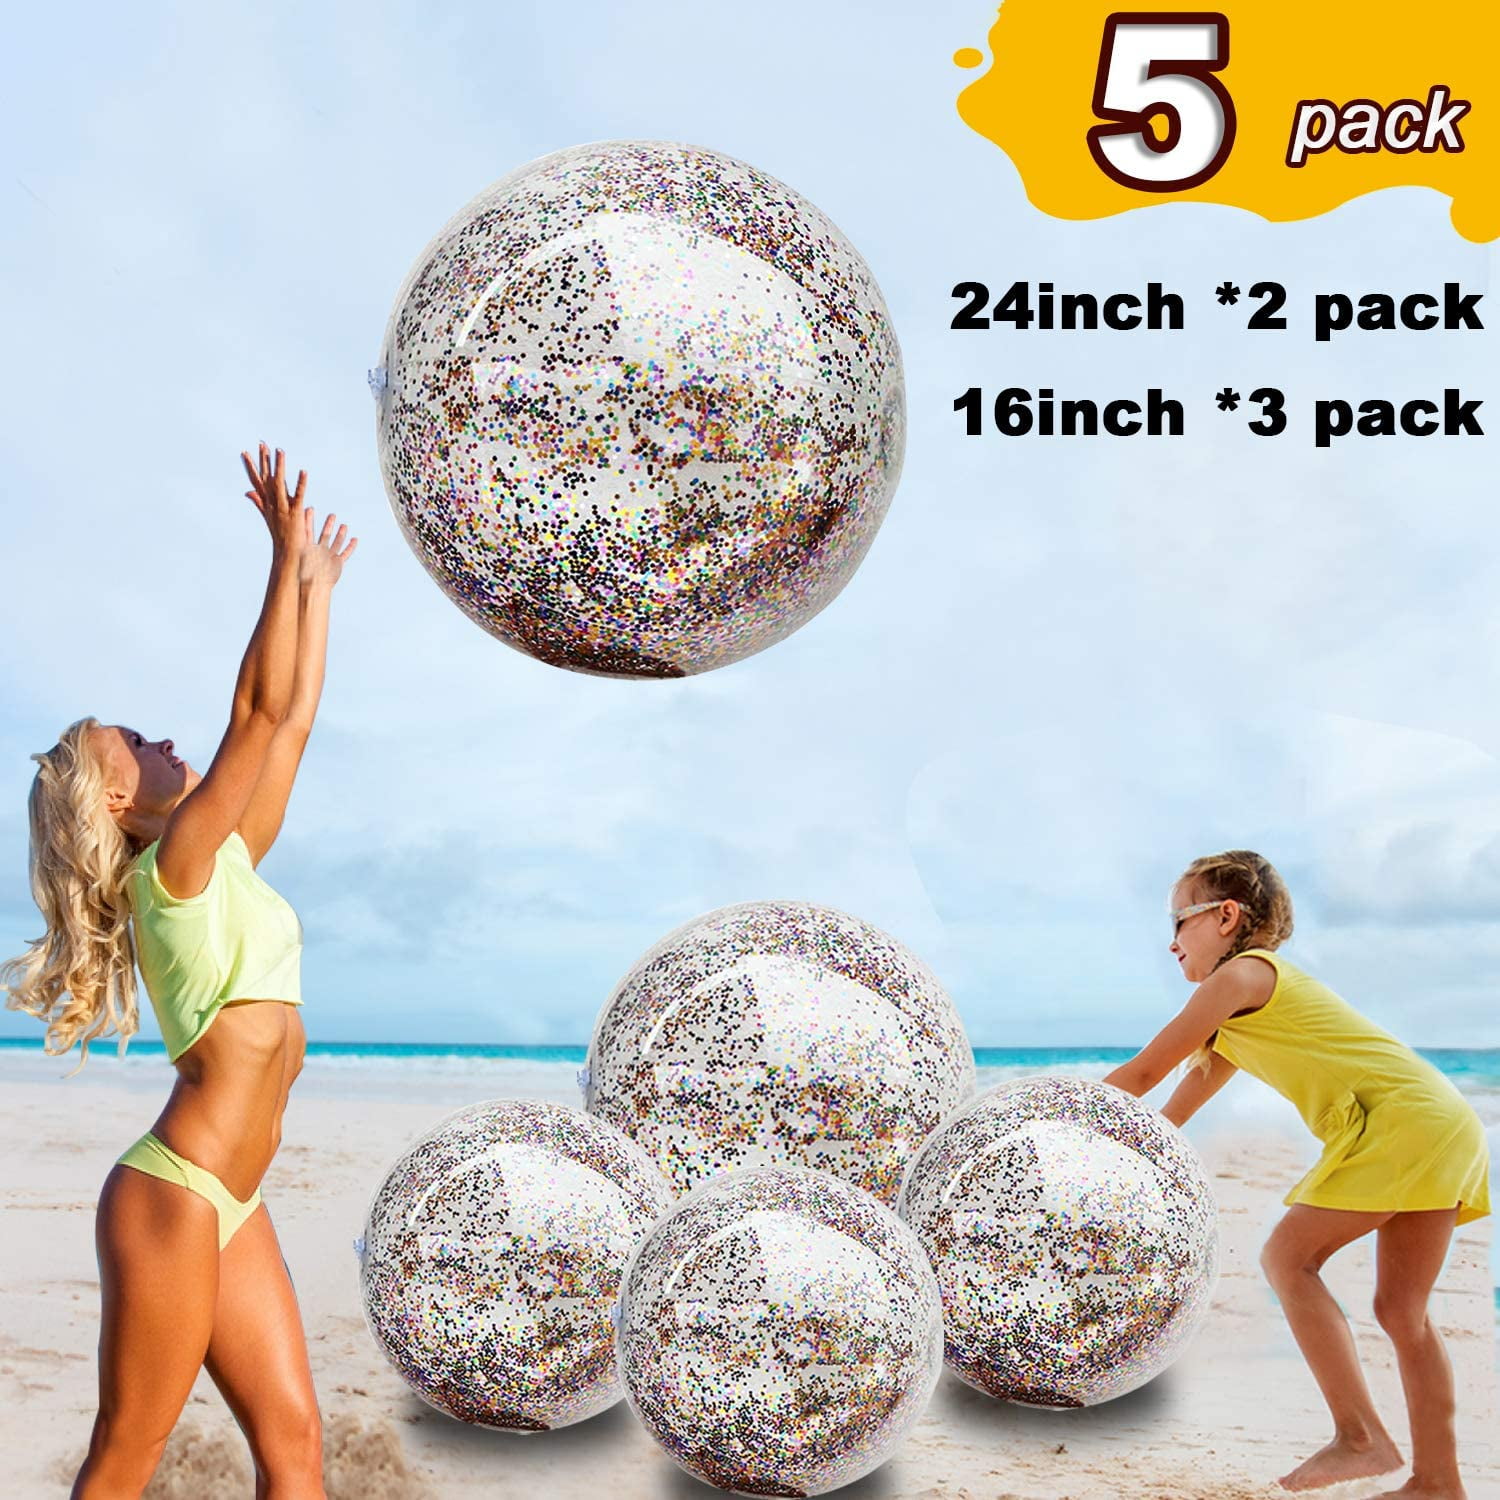 5 X 8.5" Inflatable Footballs Summer Beach Ball Kids Pool Party Loot Bag Fillers 